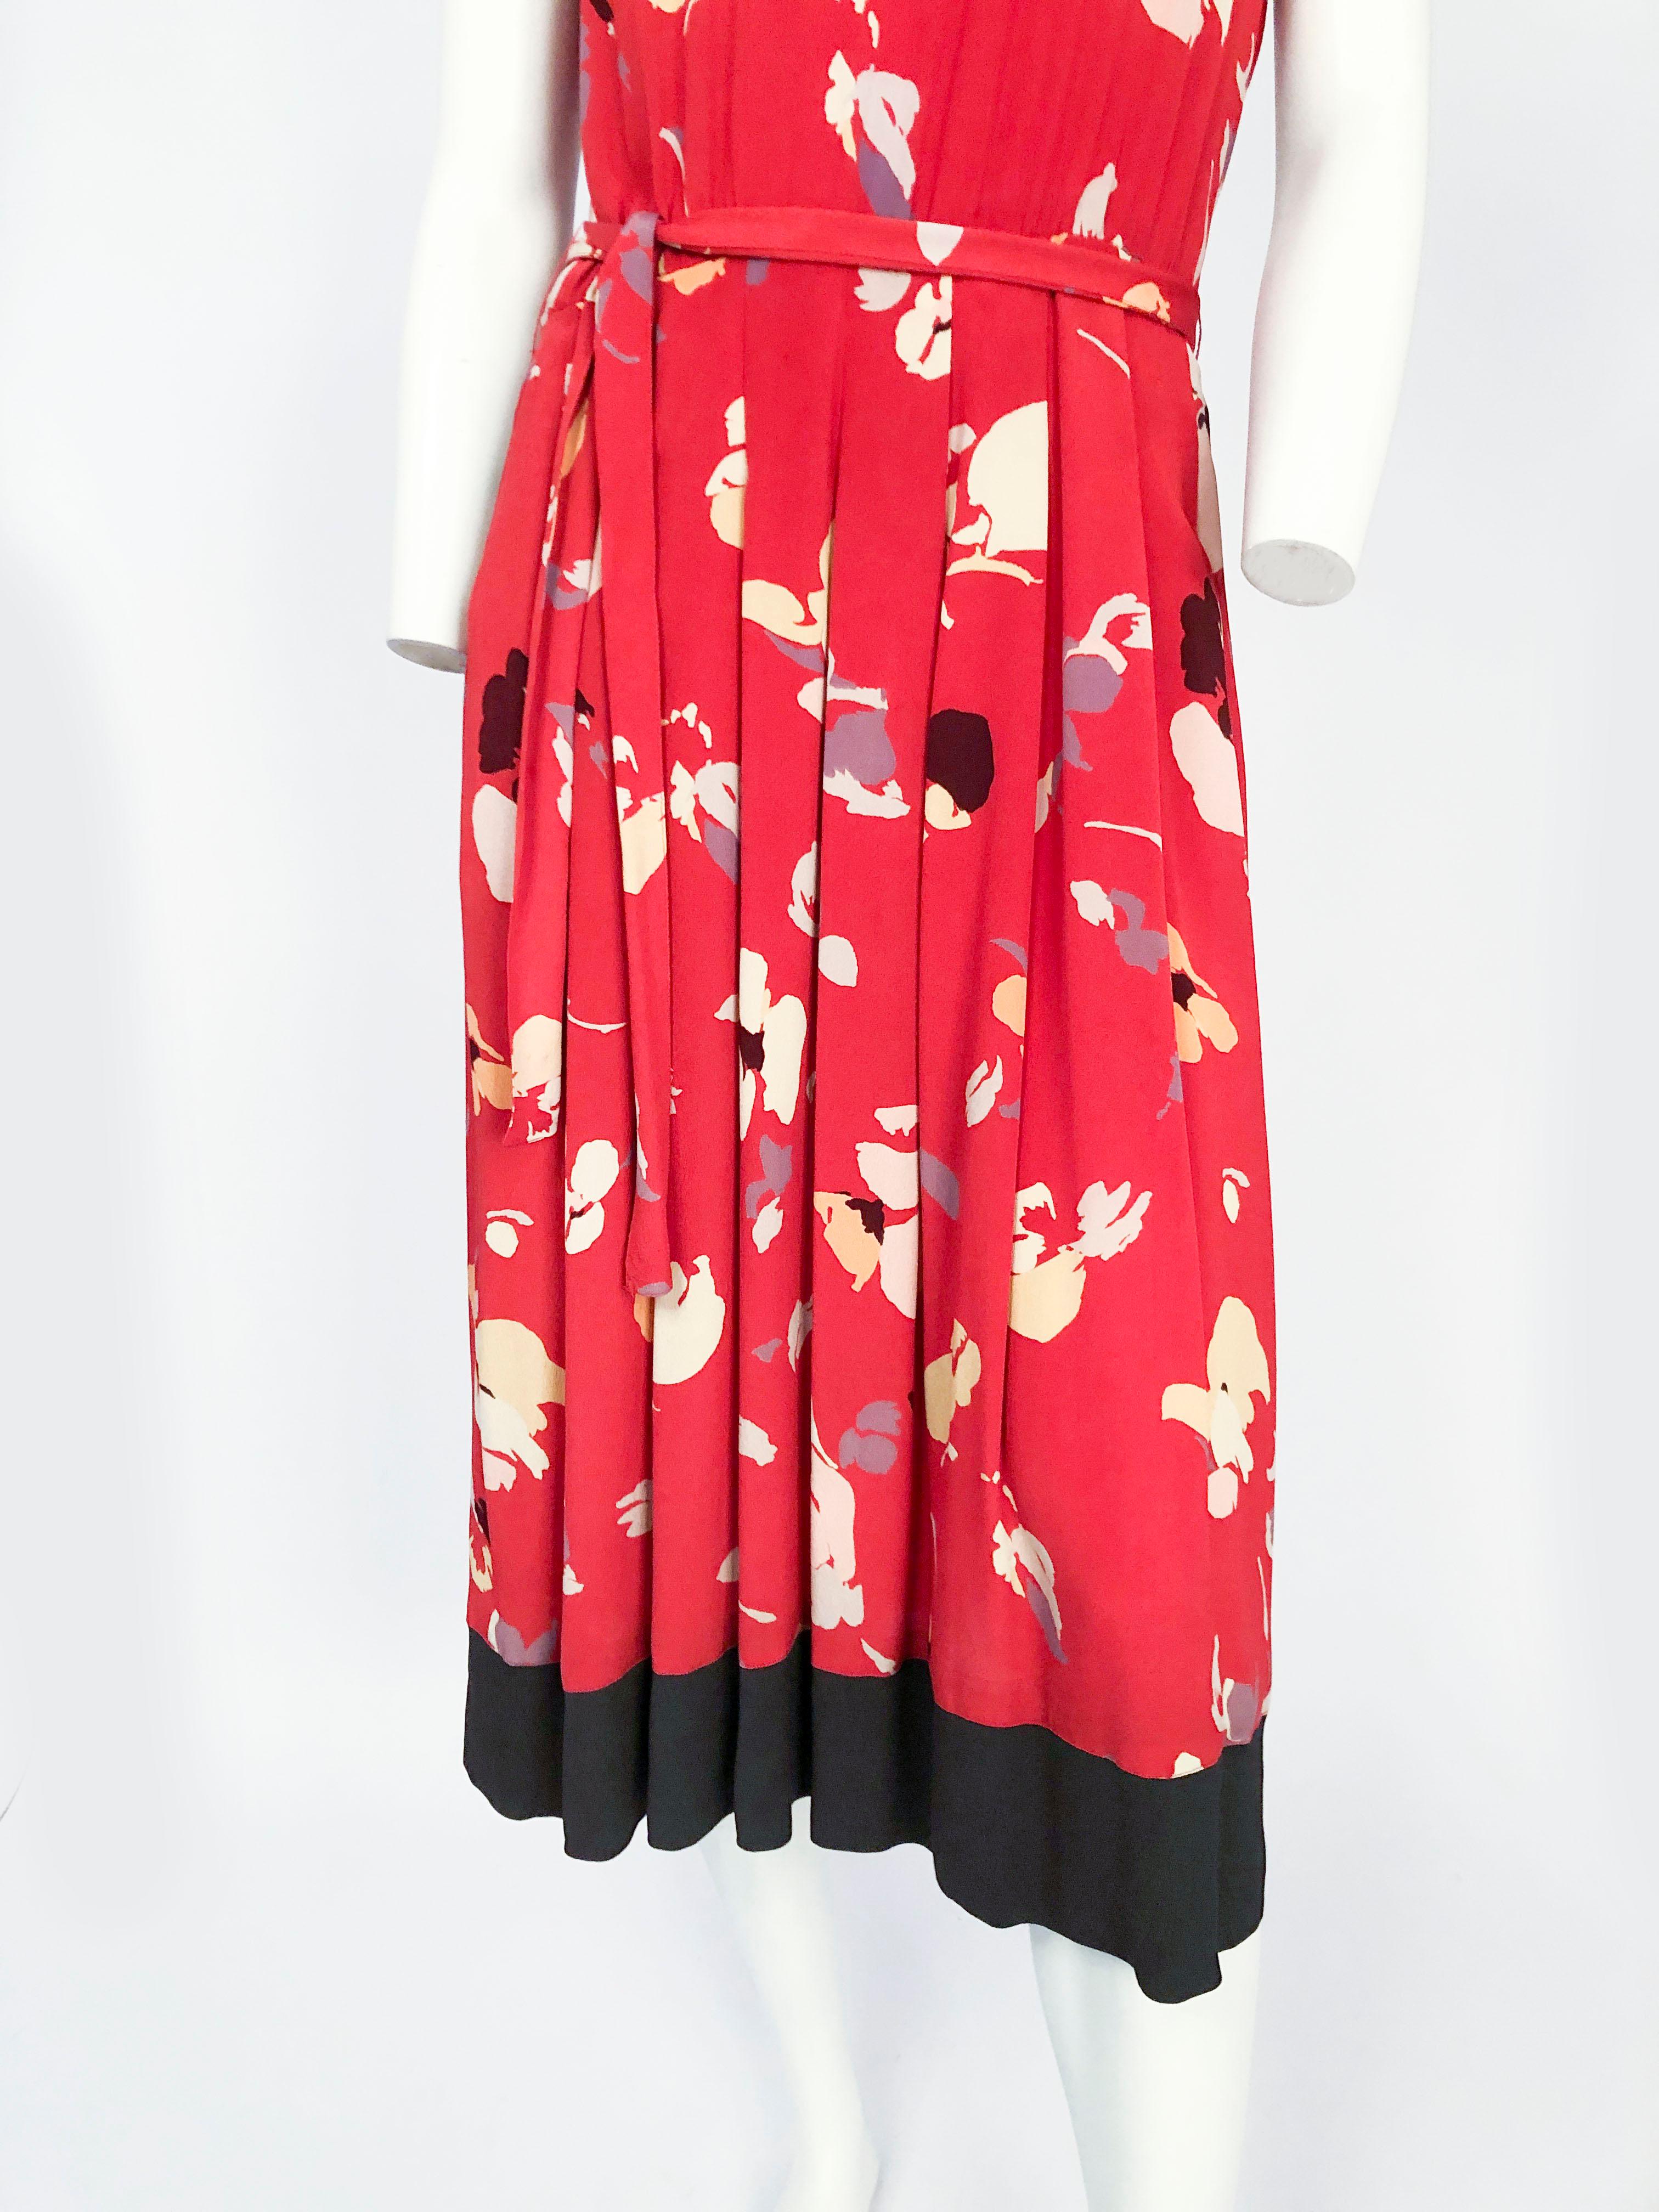 1980s Nipon Red Printed Dress With Impressionist Pattern, modified boat neckline, black border on sleeves, neck and hem. Matching sash, knife pleats on skirt and zipper/button closure on the back of the dress. Made of silk crepe. 